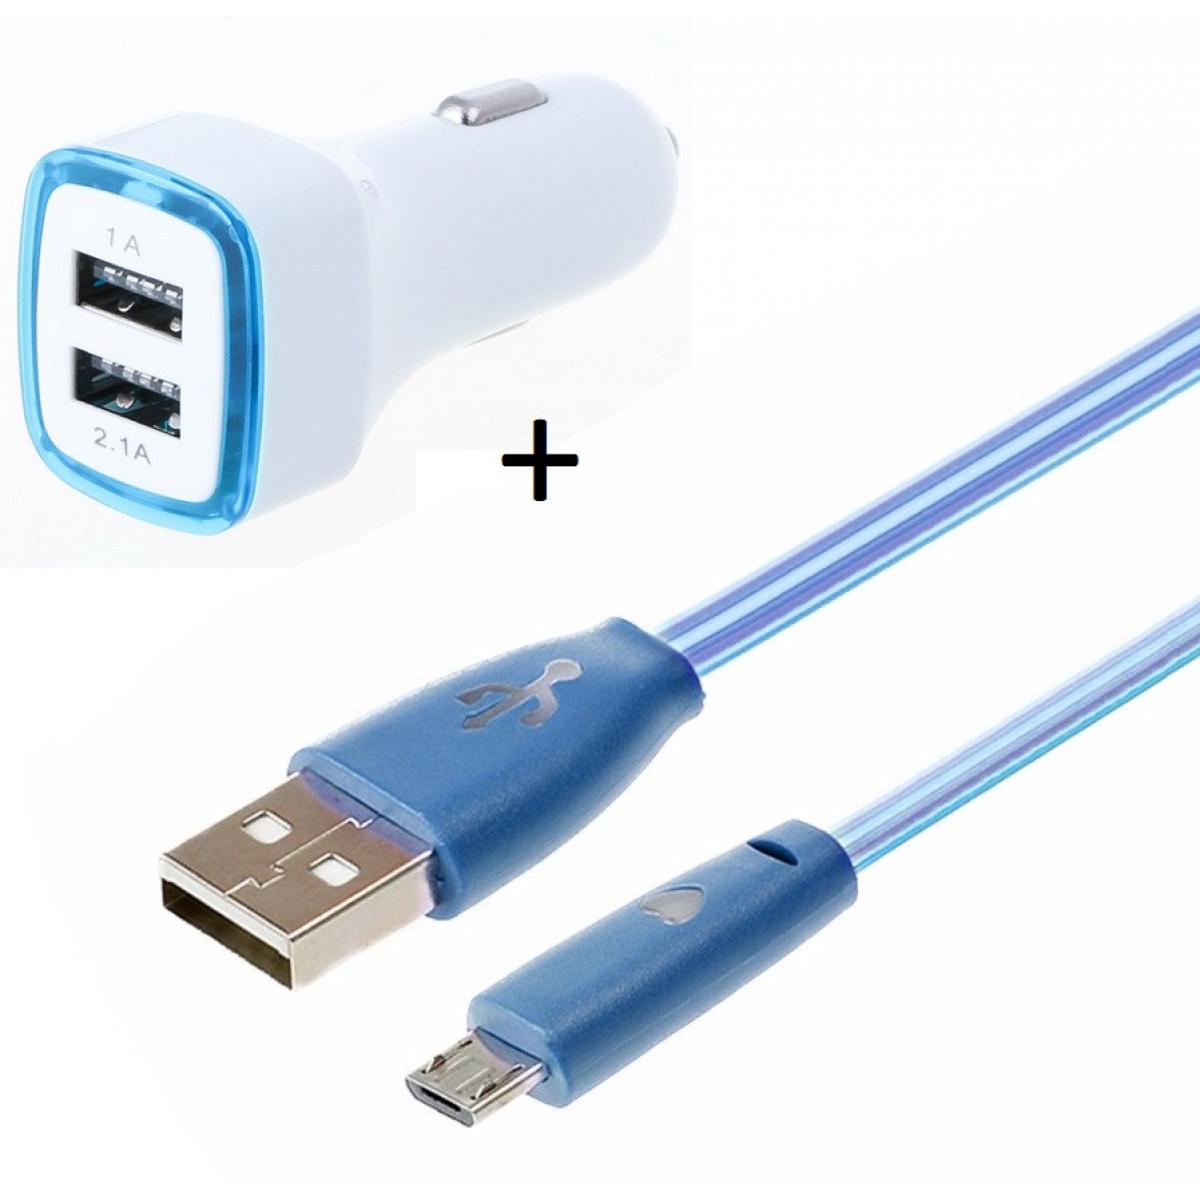 Shot - Pack Chargeur Voiture pour GIONEE F9 Smartphone Micro USB (Cable Smiley + Double Adaptateur LED Allume Cigare) (BLEU) - Chargeur Voiture 12V